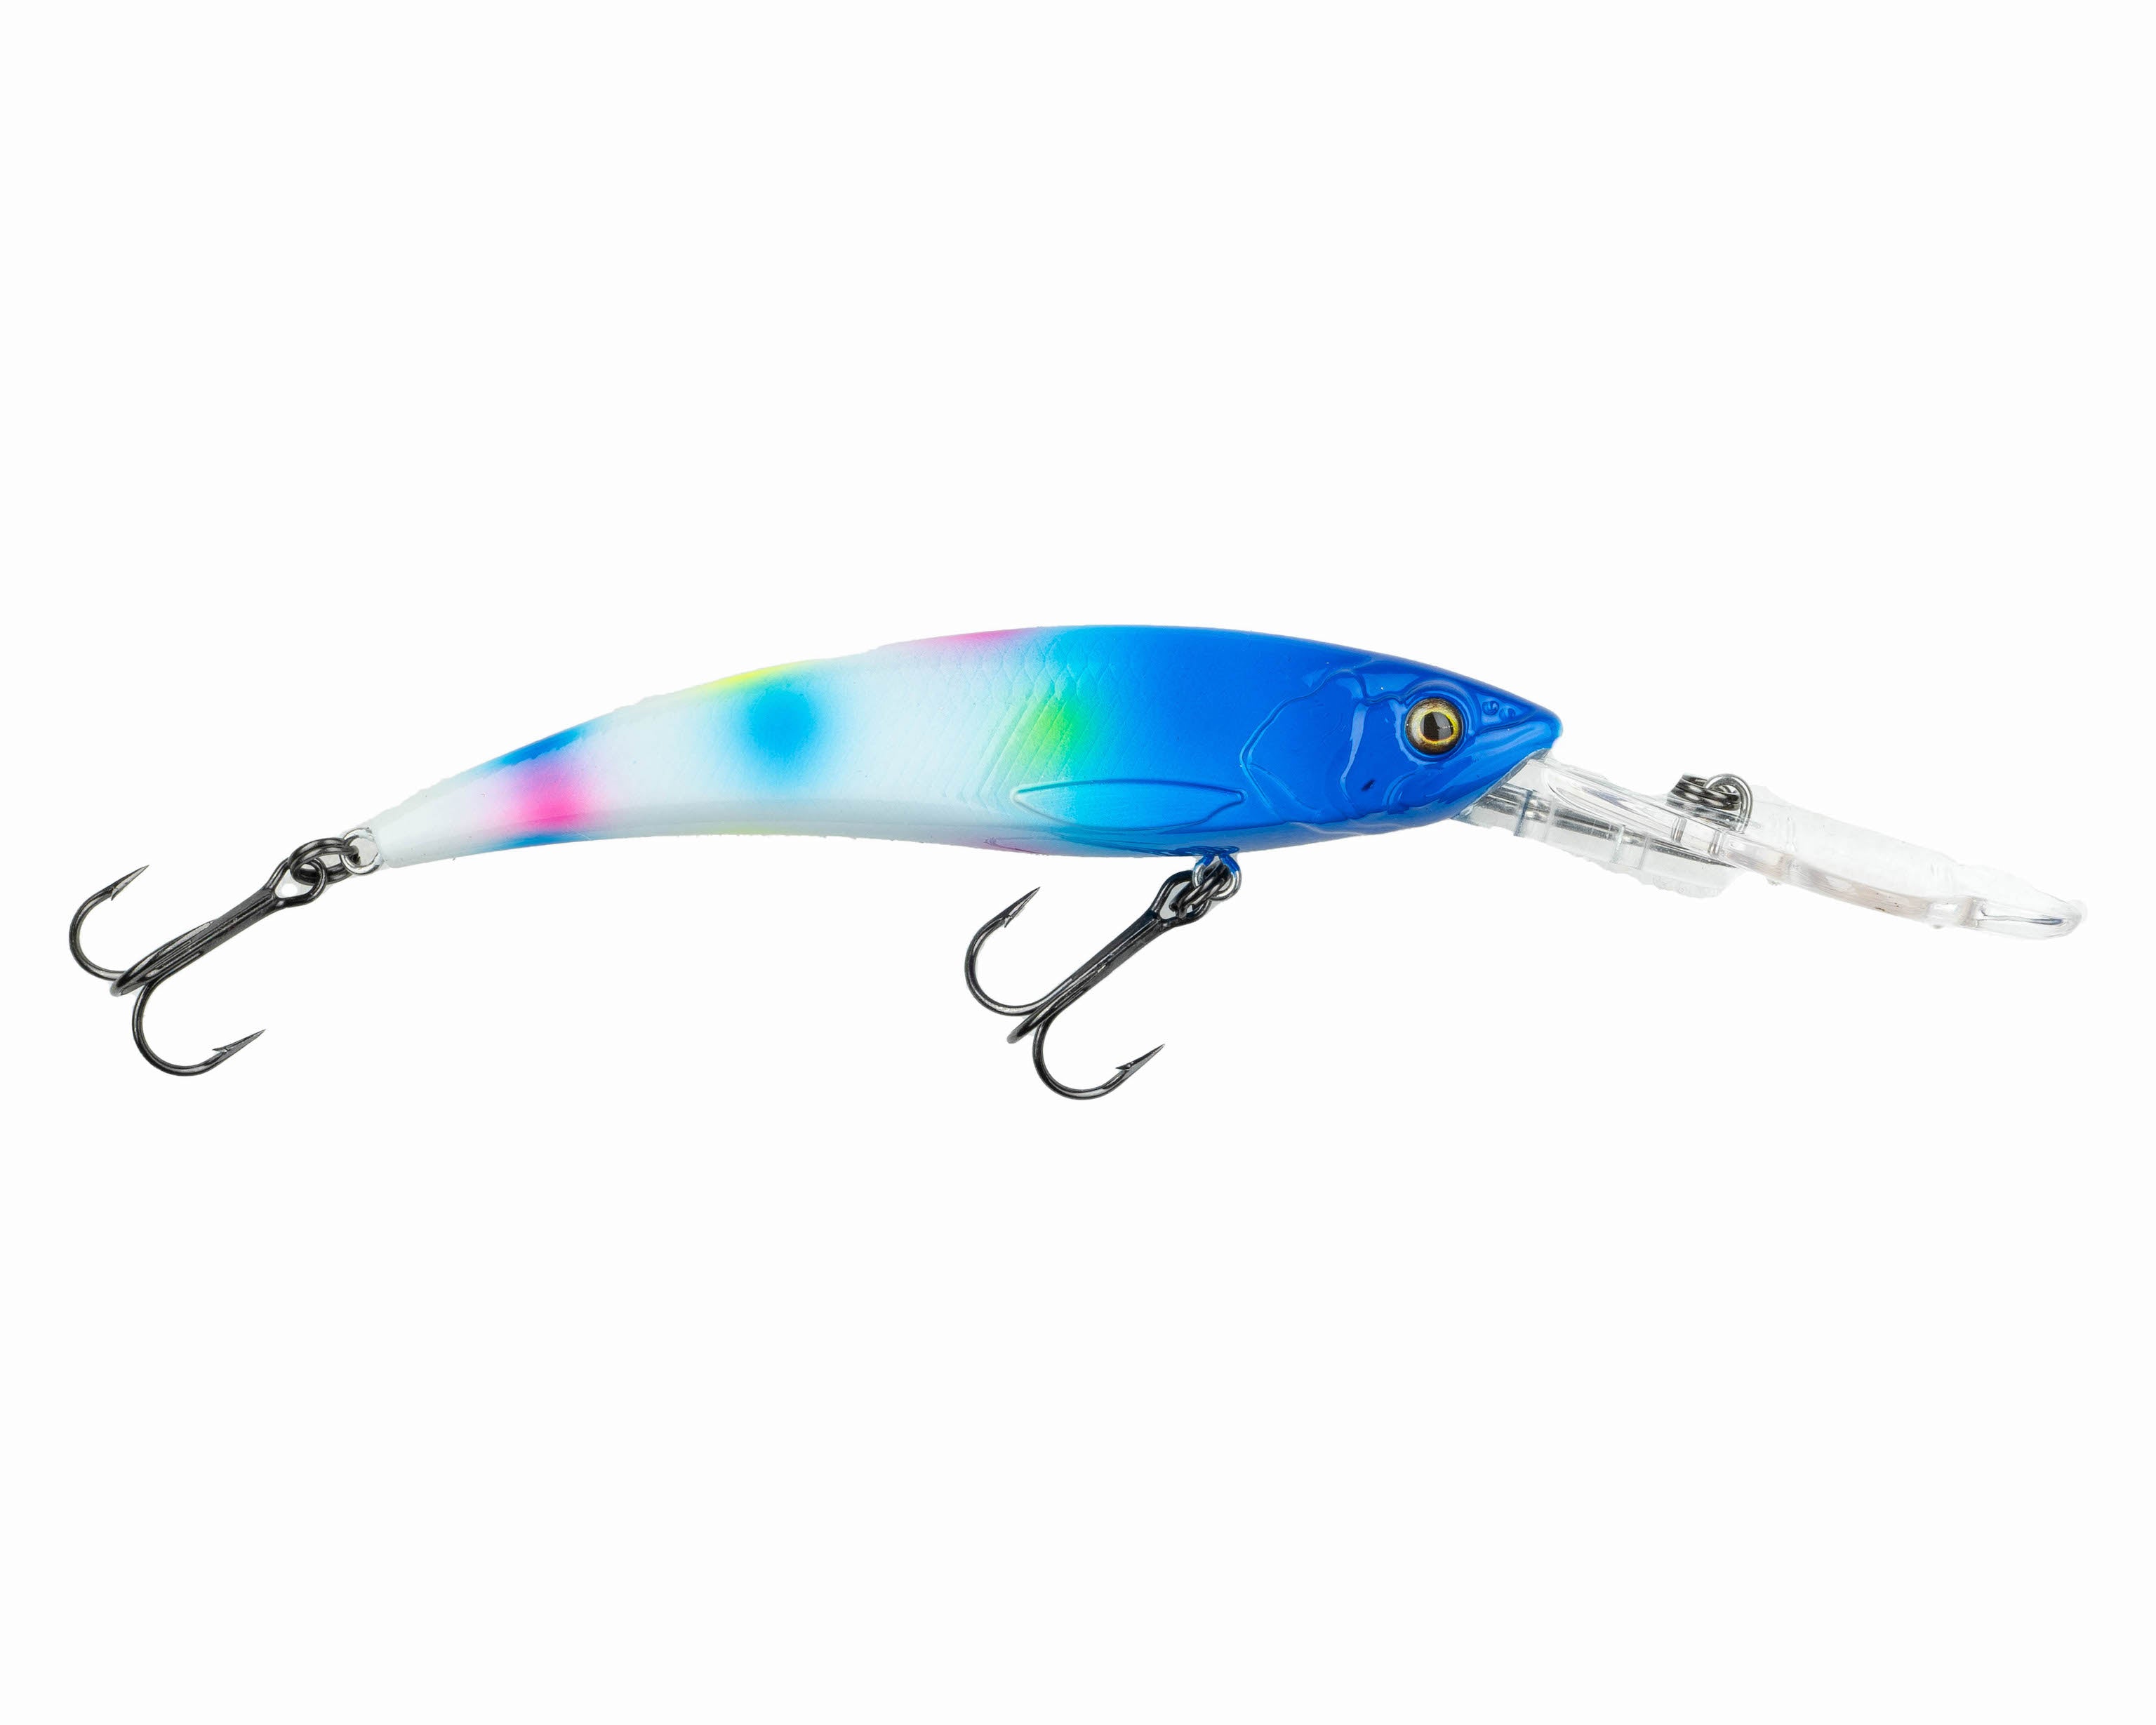 Ultra Diver Minnow 4 Crankbaits by Freedom Tackle